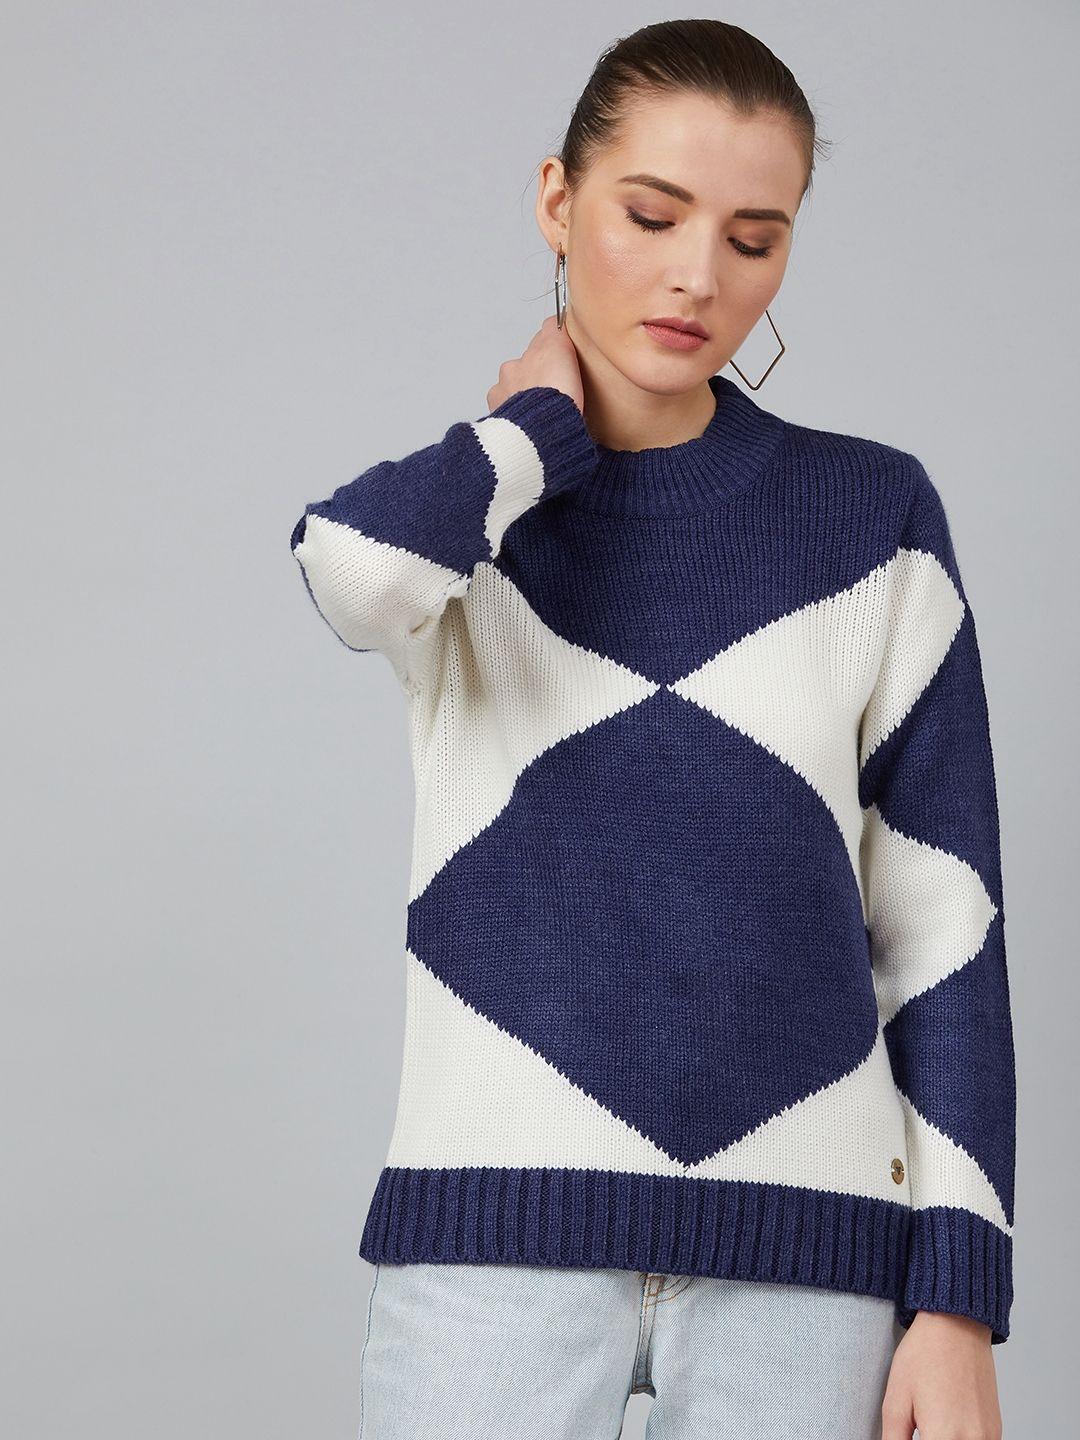 cayman women navy blue & white printed pullover sweater